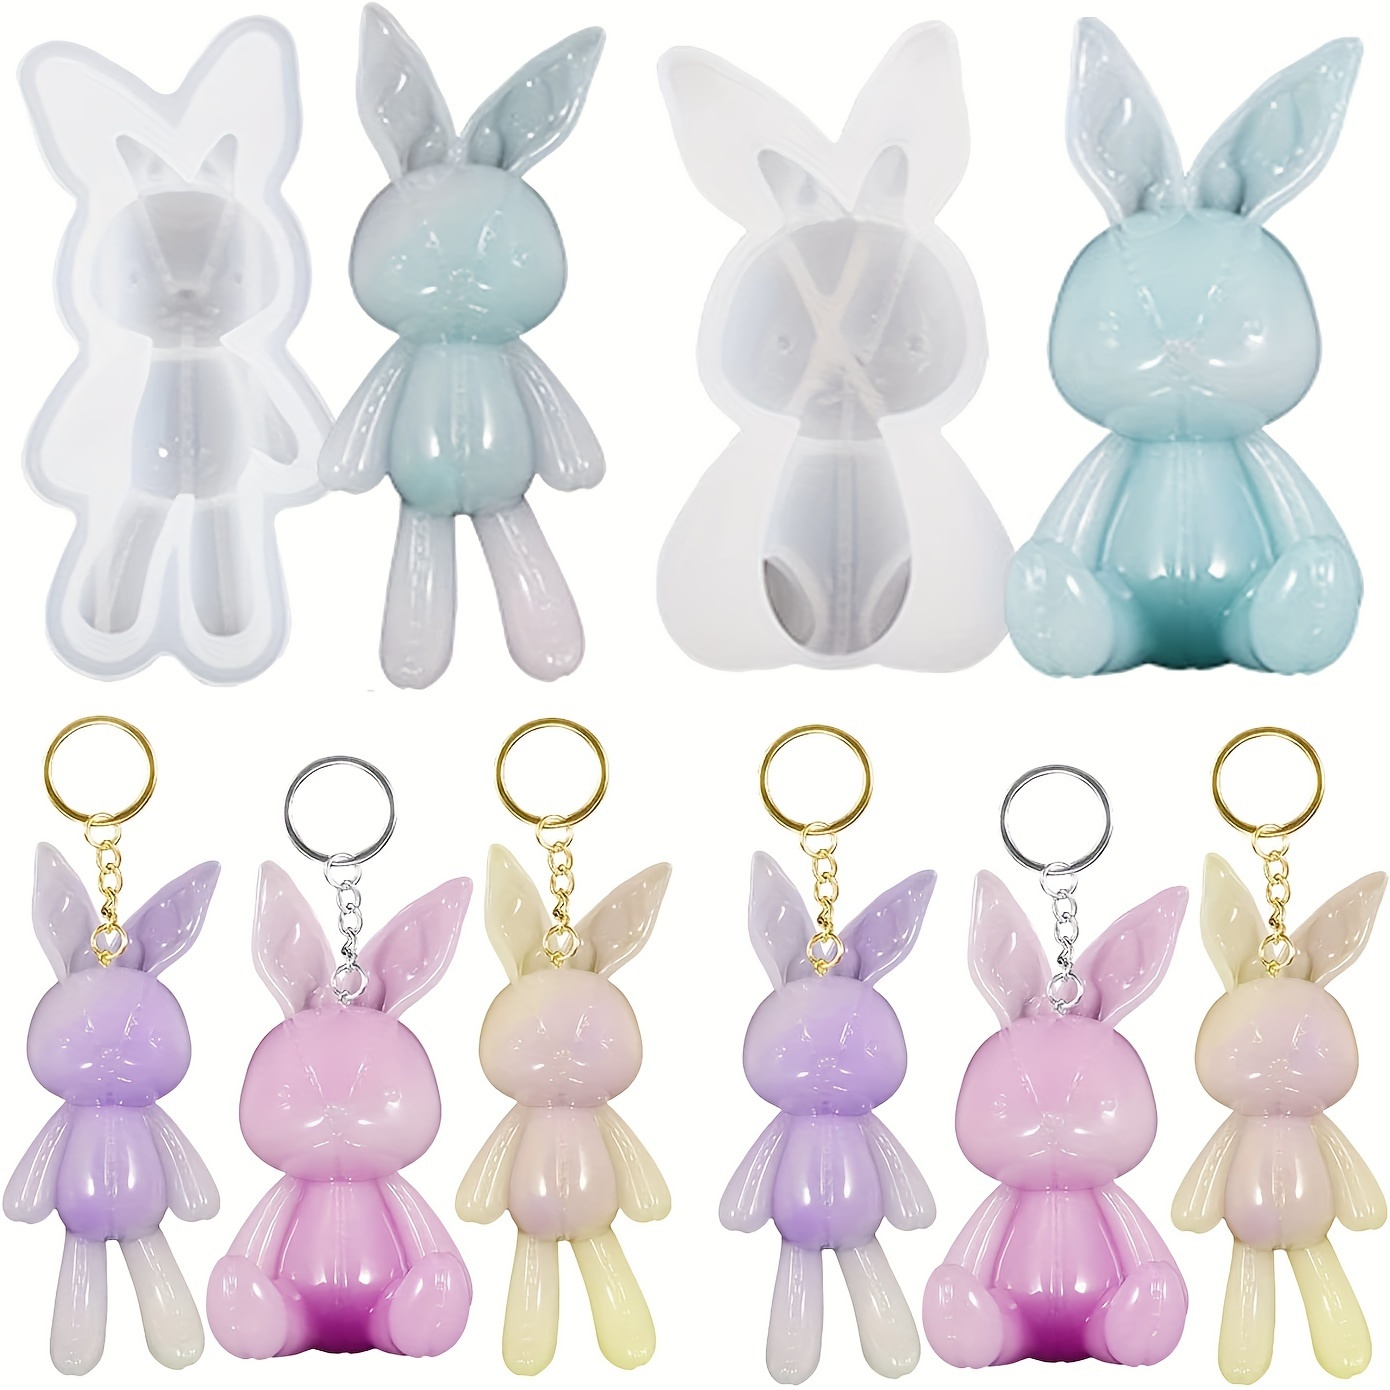 

Rabbit Resin Mold Easter Bunny Silicone Mold Diy Handmade Artifact Crystal Epoxy Silicone Casting Mold For Easter Home Decoration Bag Keyrings Ornaments